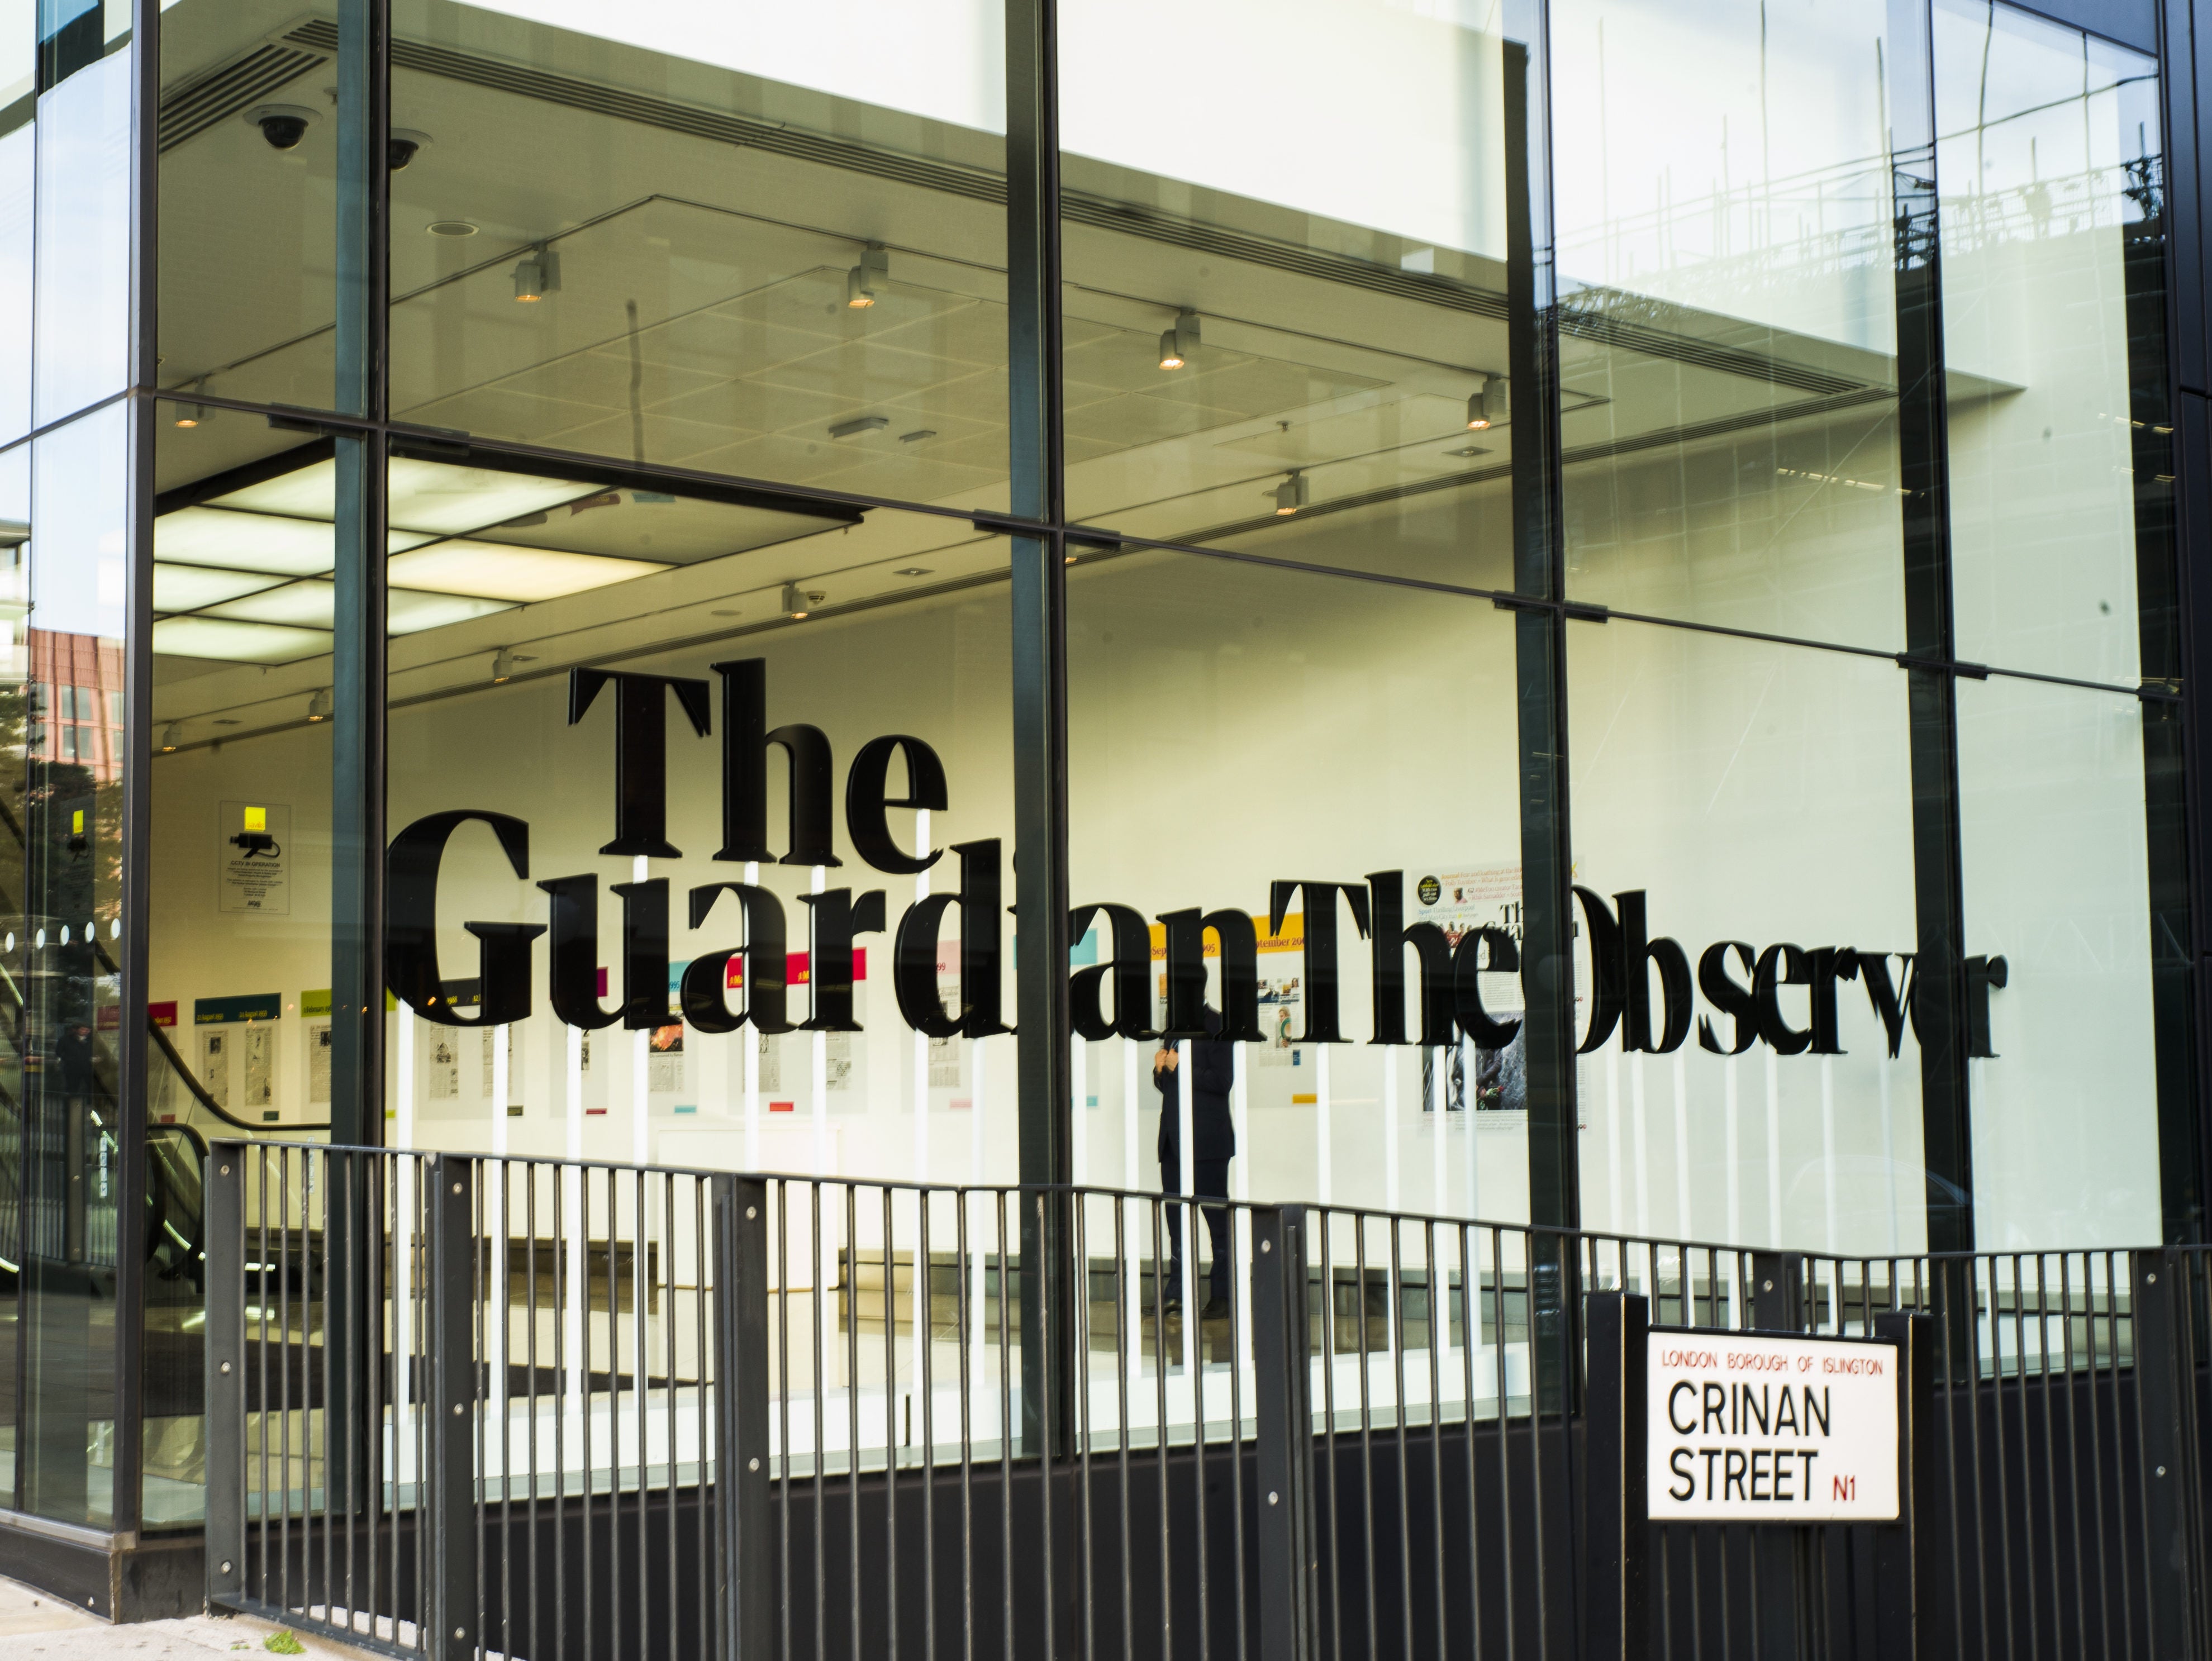 Decline of print and beef ban help Guardian reduce greenhouse gas emissions